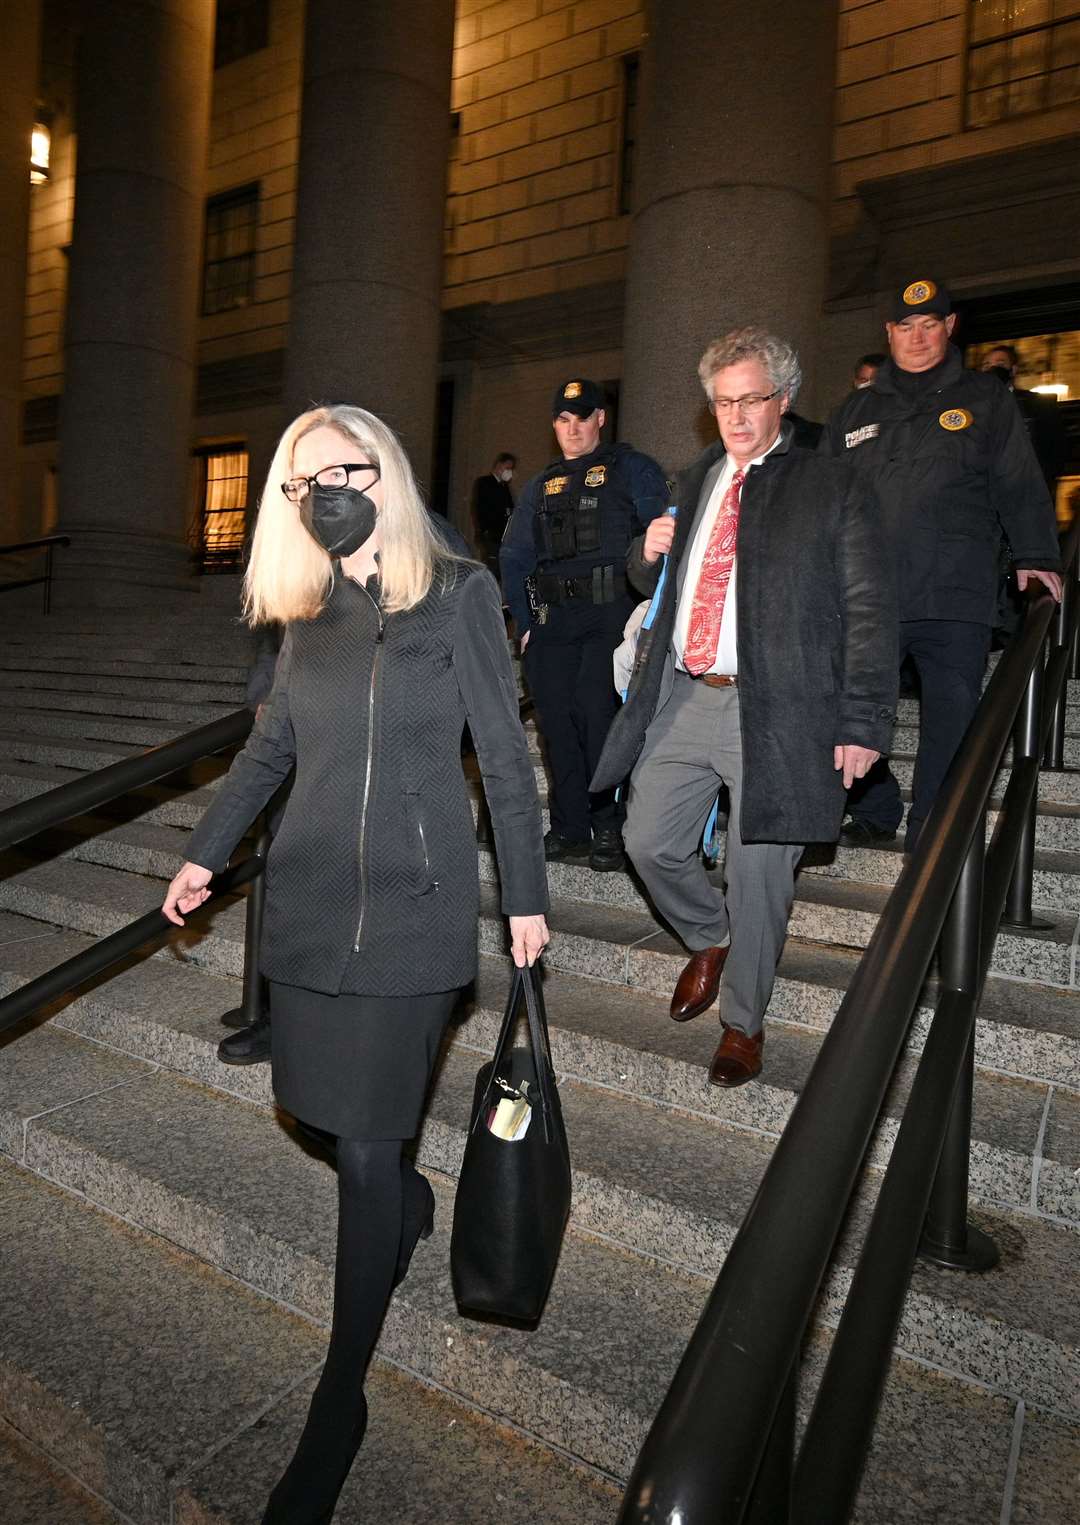 Defence lawyers Laura Menninger (left) and Jeffrey Pagliuca (middle right) leaving the federal courthouse after Maxwell was convicted (Anthony Behar/PA)